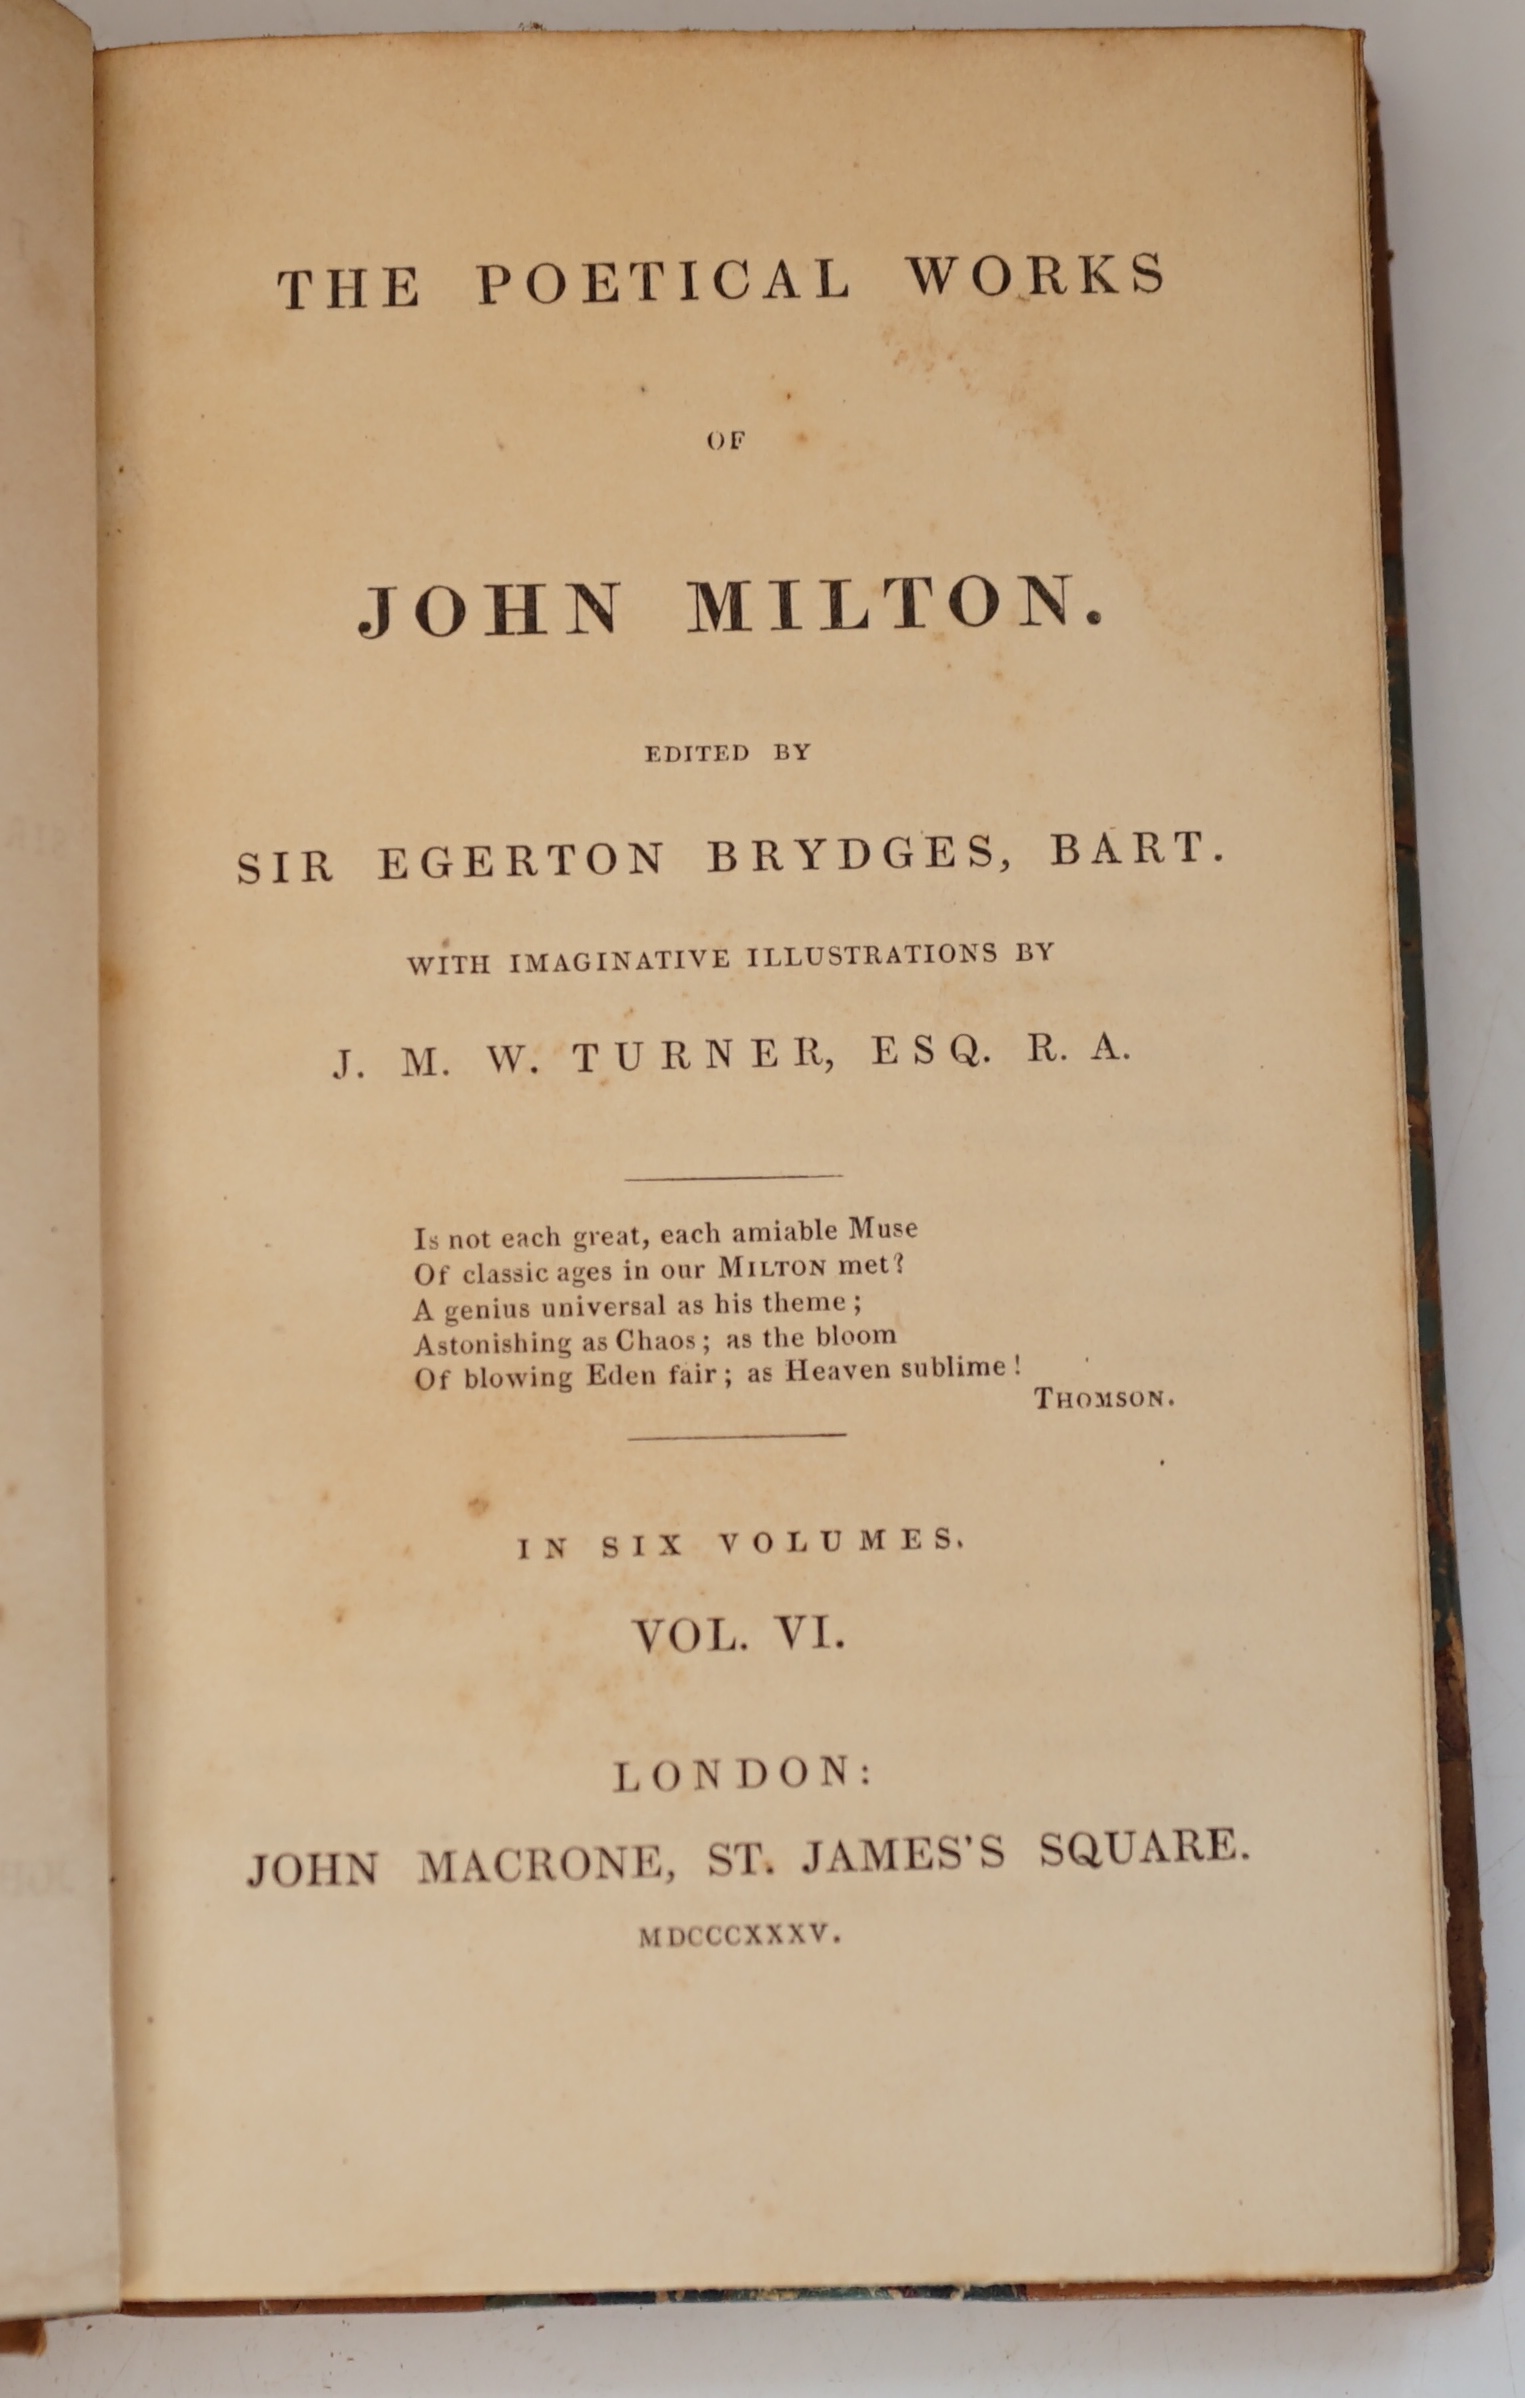 Milton, John - The Poetical Works, 6 vols, edited by Sir Egerton Brydges, 8vo, original half calf gilt, with marbled boards, engraved frontispiece and title to each volume, John Macrone, London, 1835